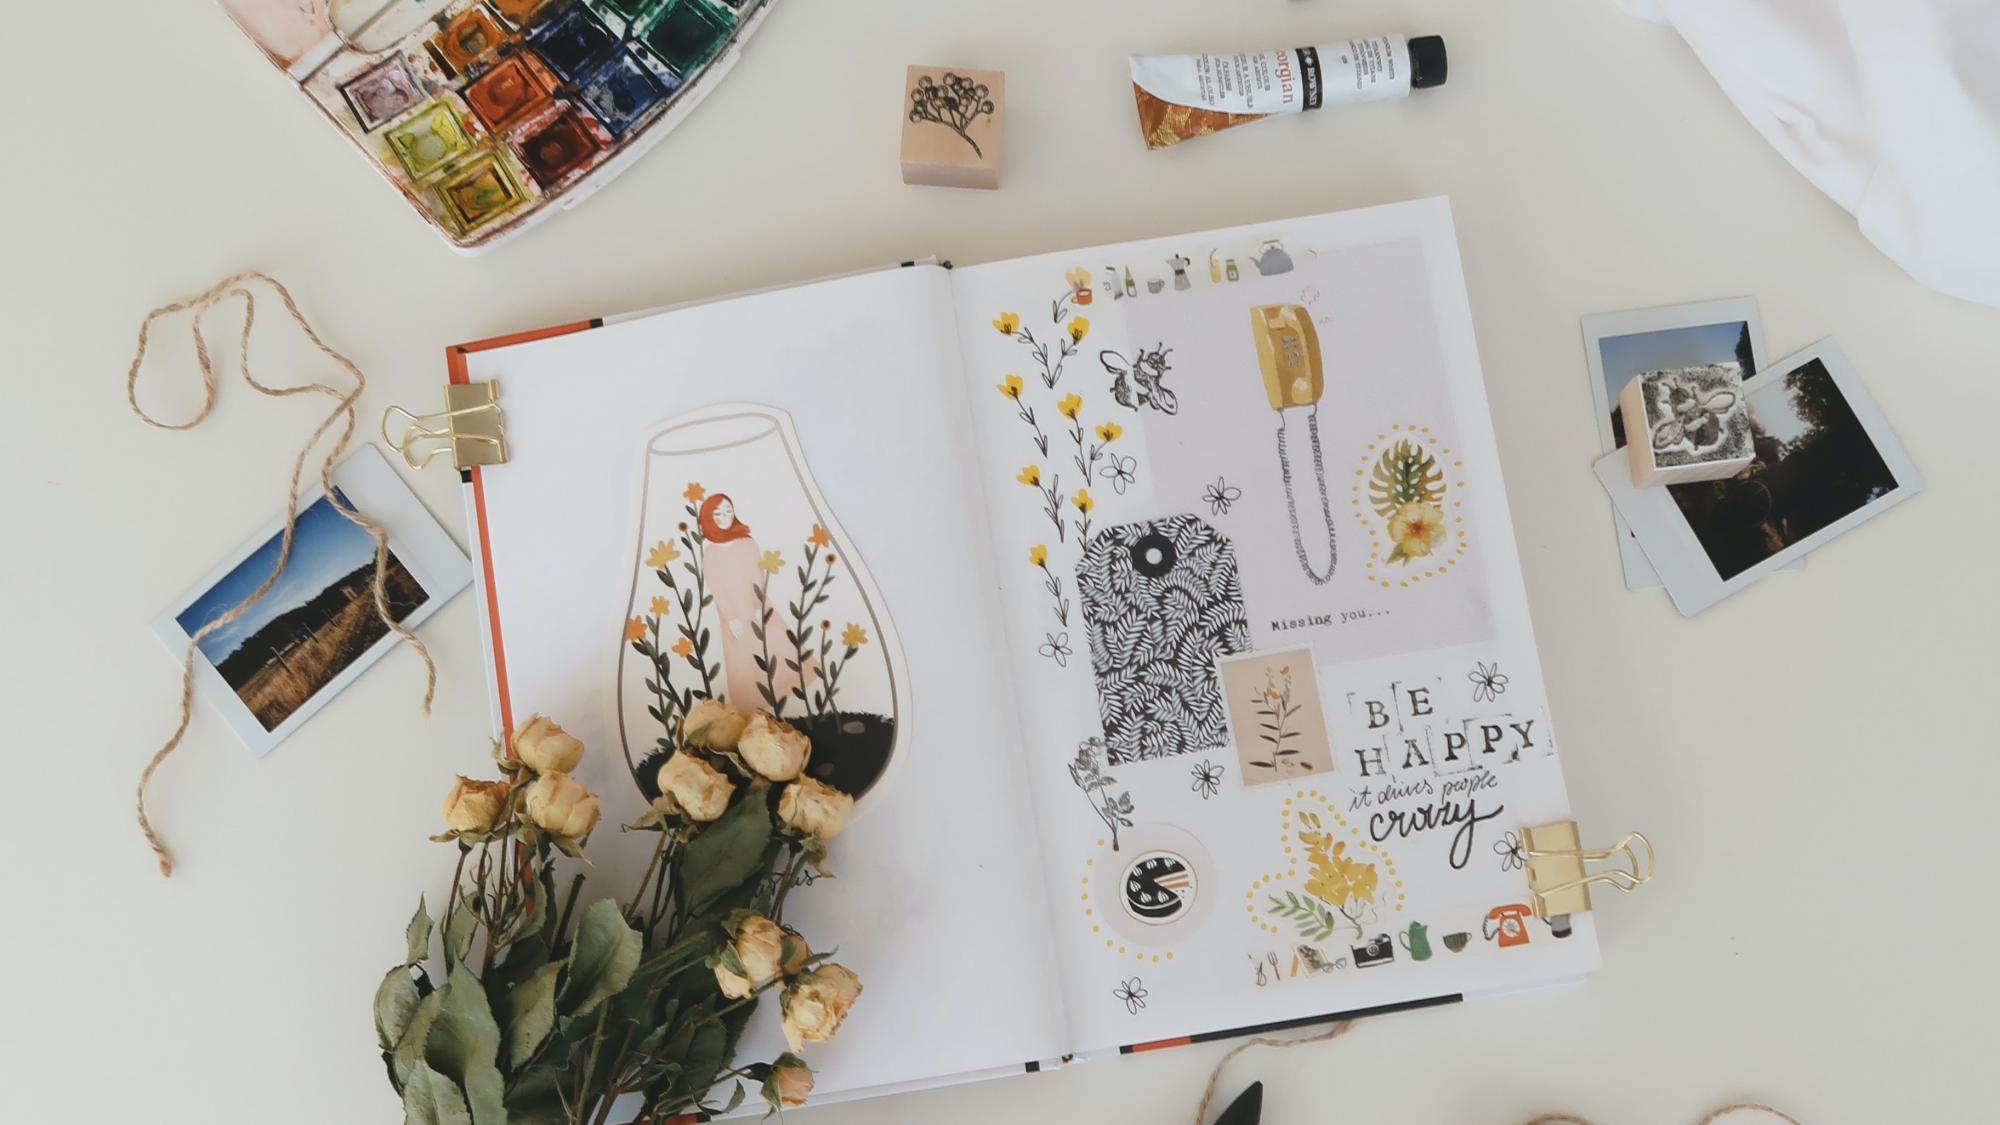 A journal, paints, pens, flowers and photos lay scattered aesthetically on a table